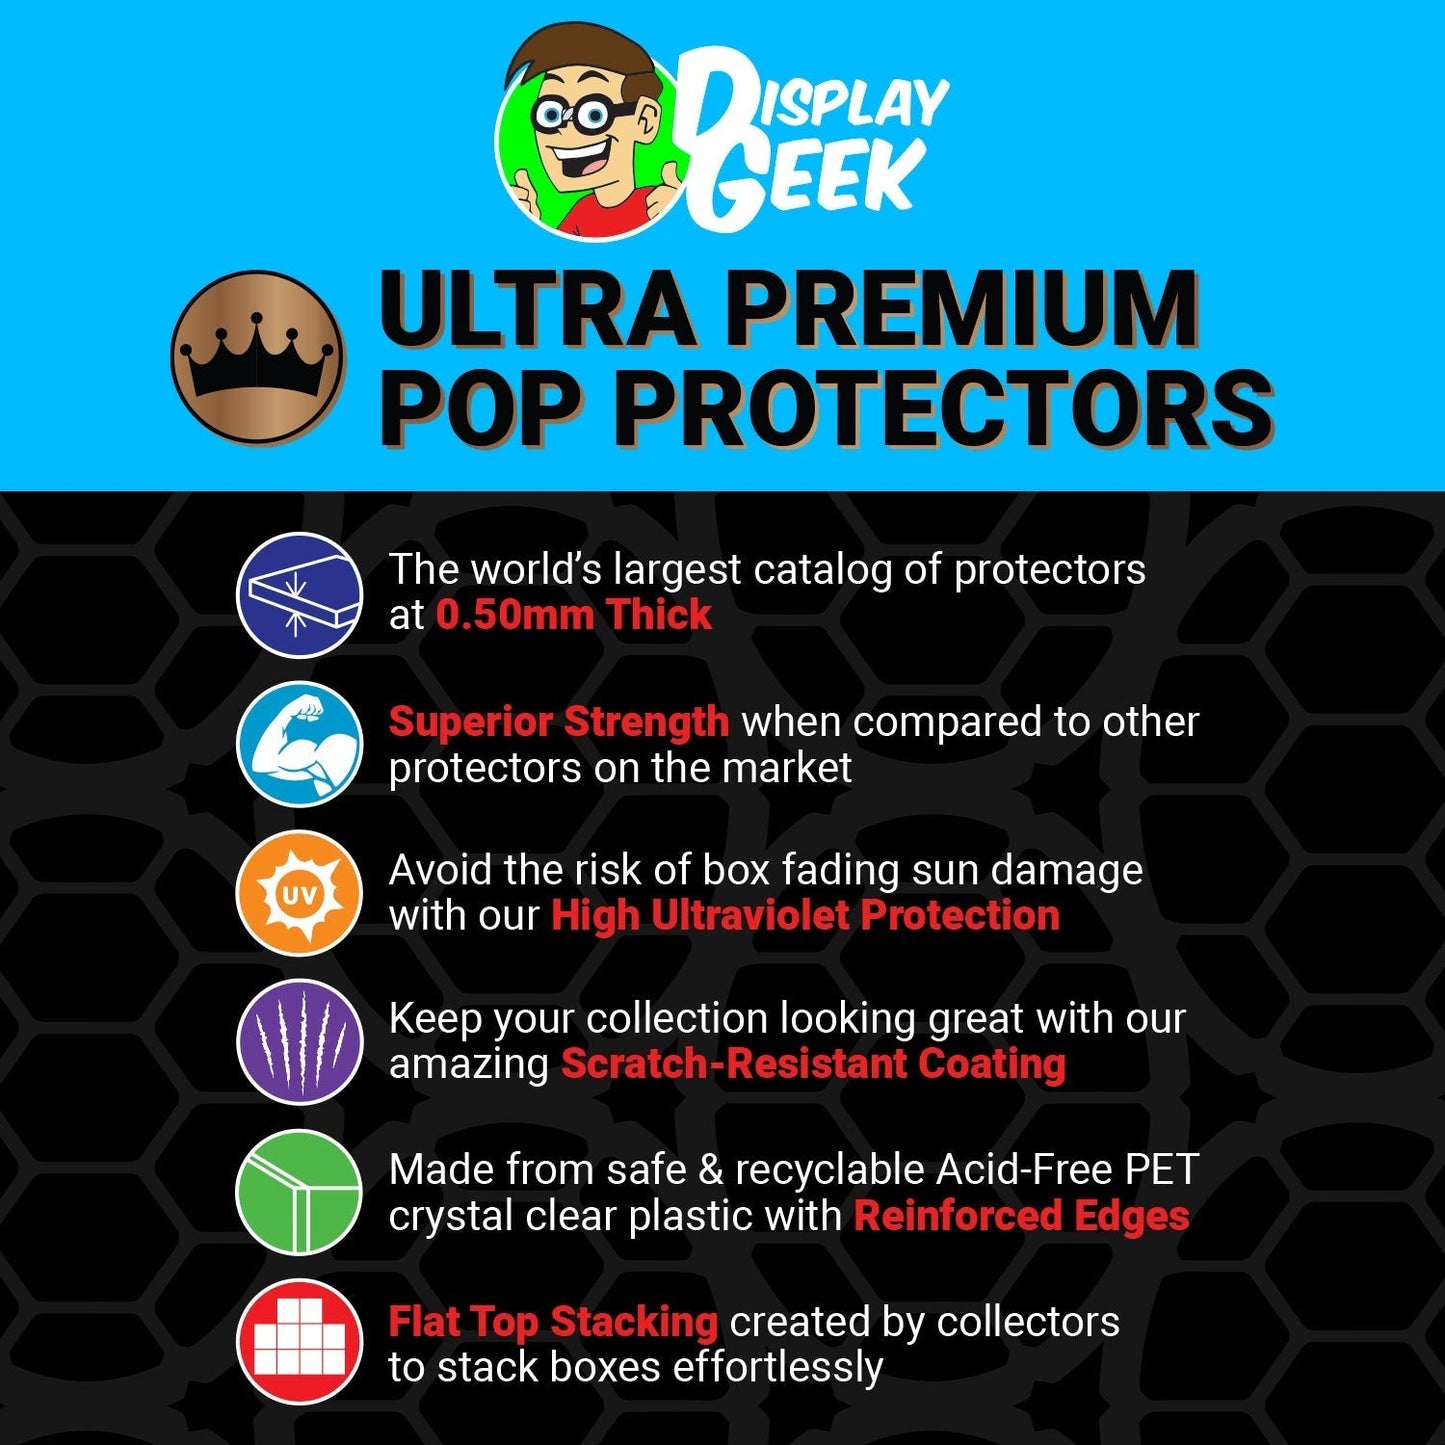 Pop Protector for Formula 1 Lewis Hamilton #308 Funko Pop Rides on The Protector Guide App by Display Geek